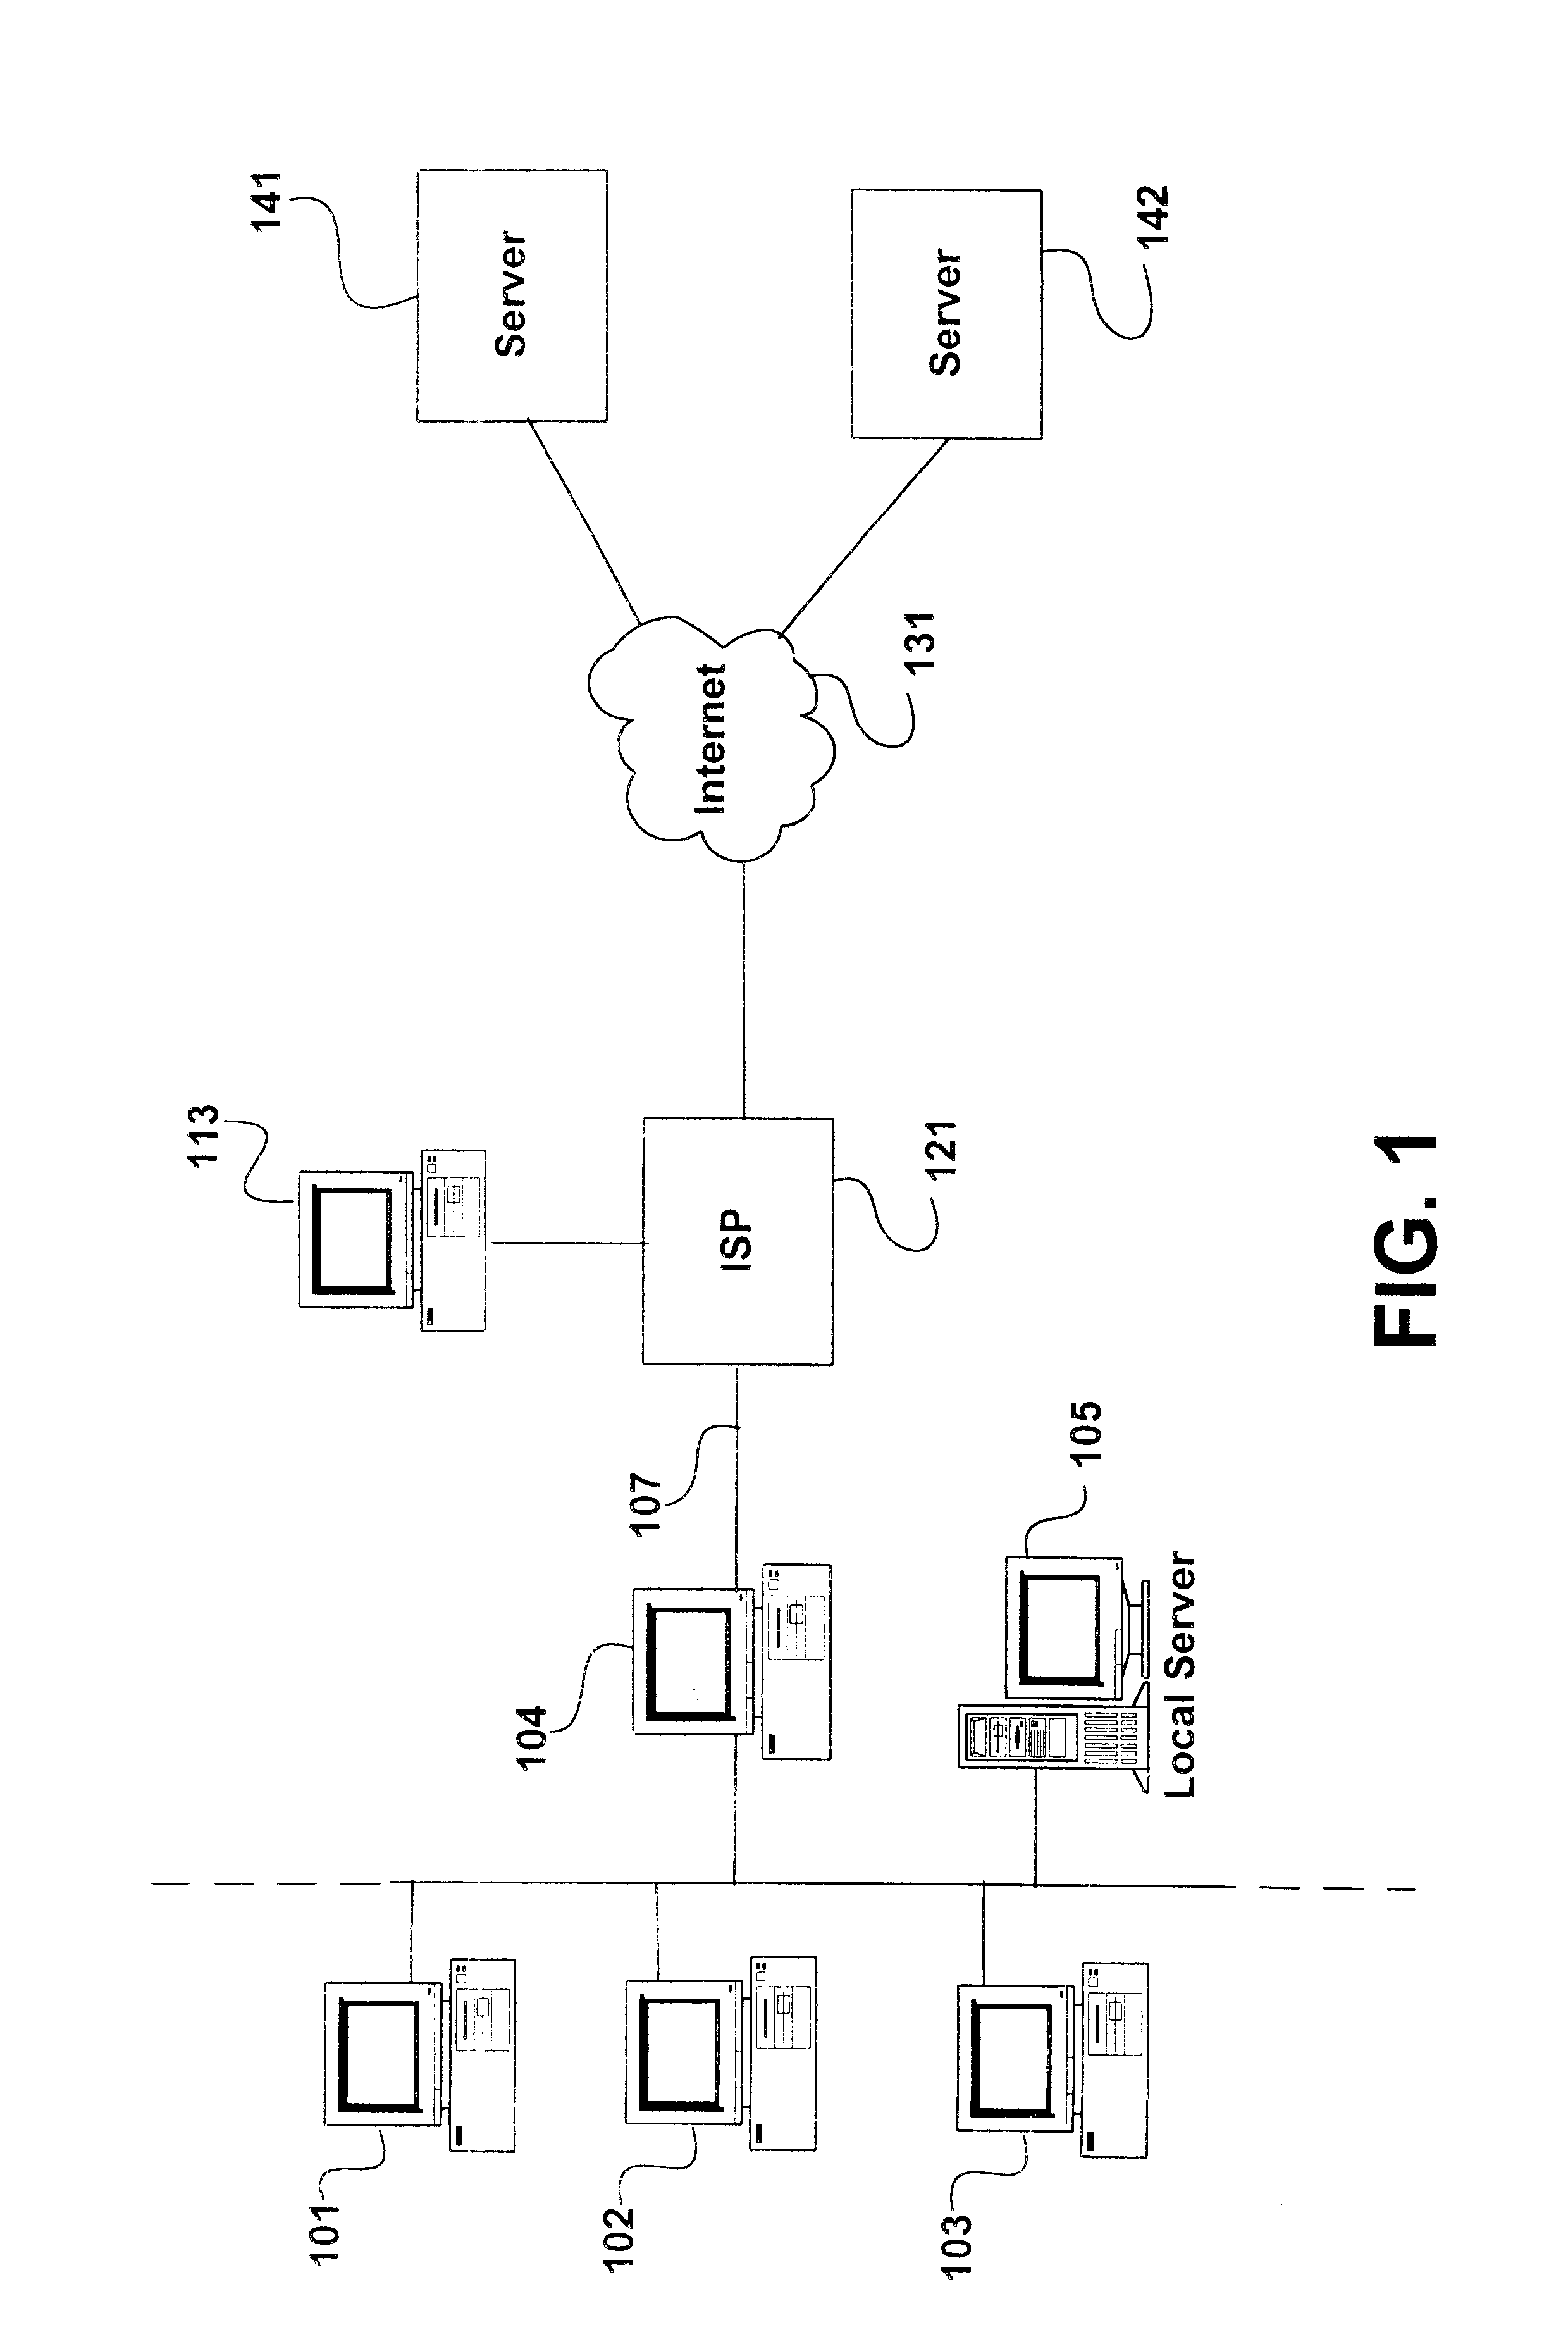 Method and apparatus providing for automatically restarting a client-server connection in a distributed network